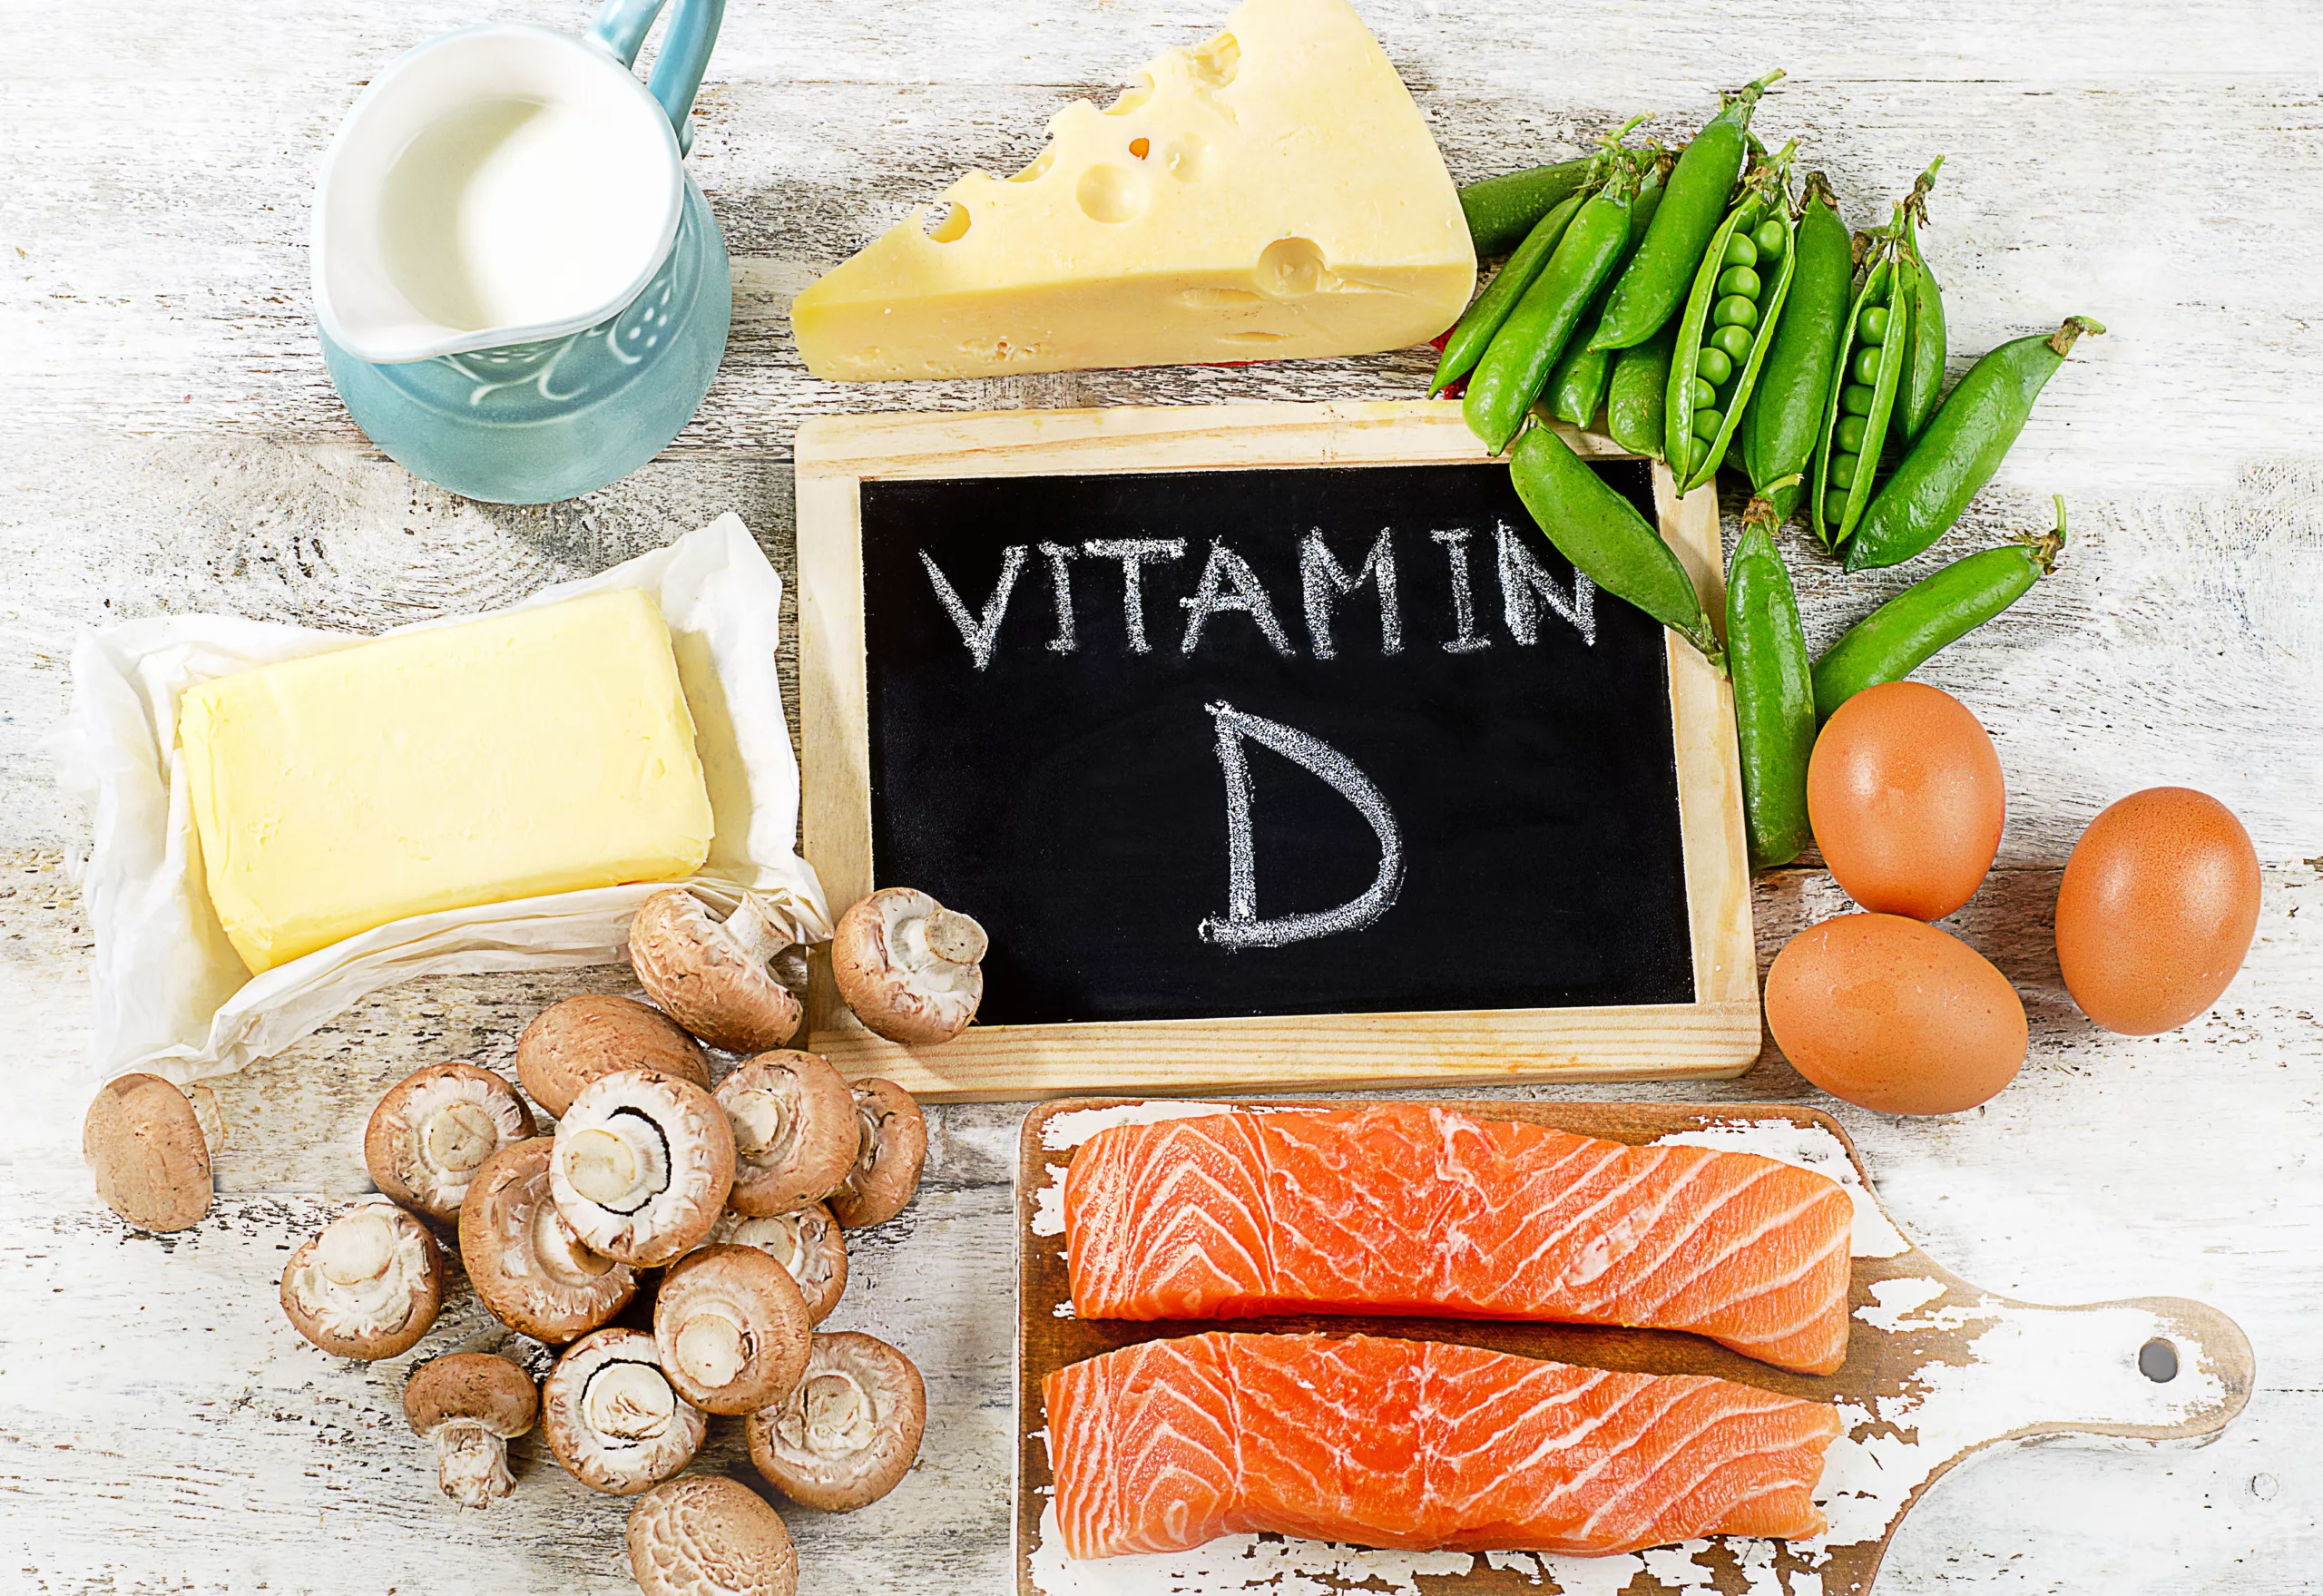 Foods rich in Vitamin D such as salmon, eggs, and cheeses.